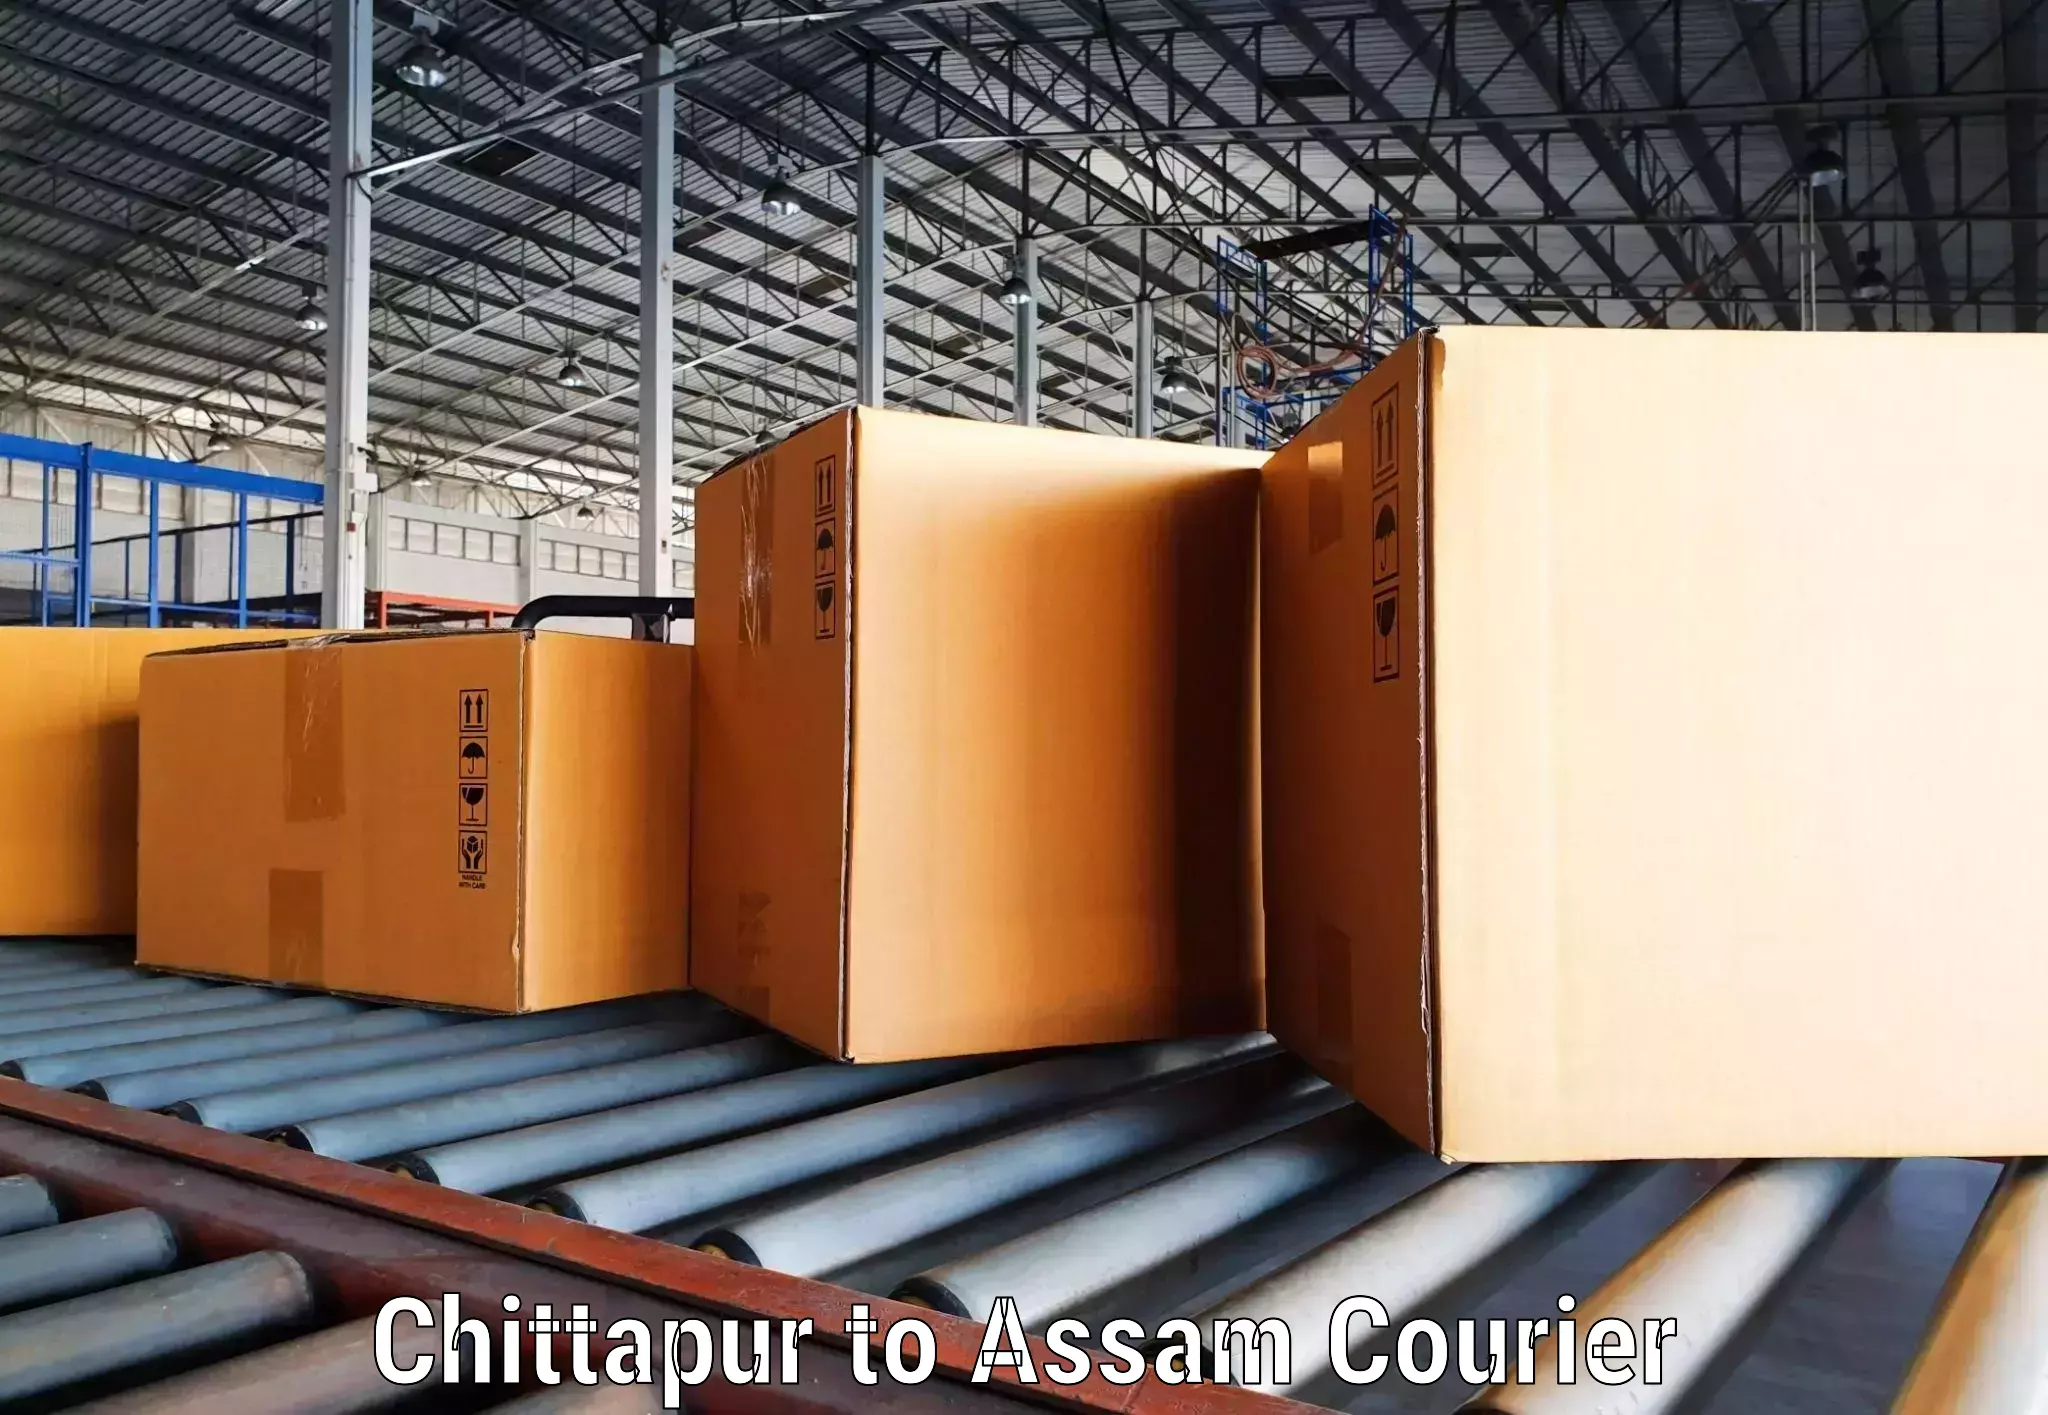 Digital shipping tools in Chittapur to Kampur